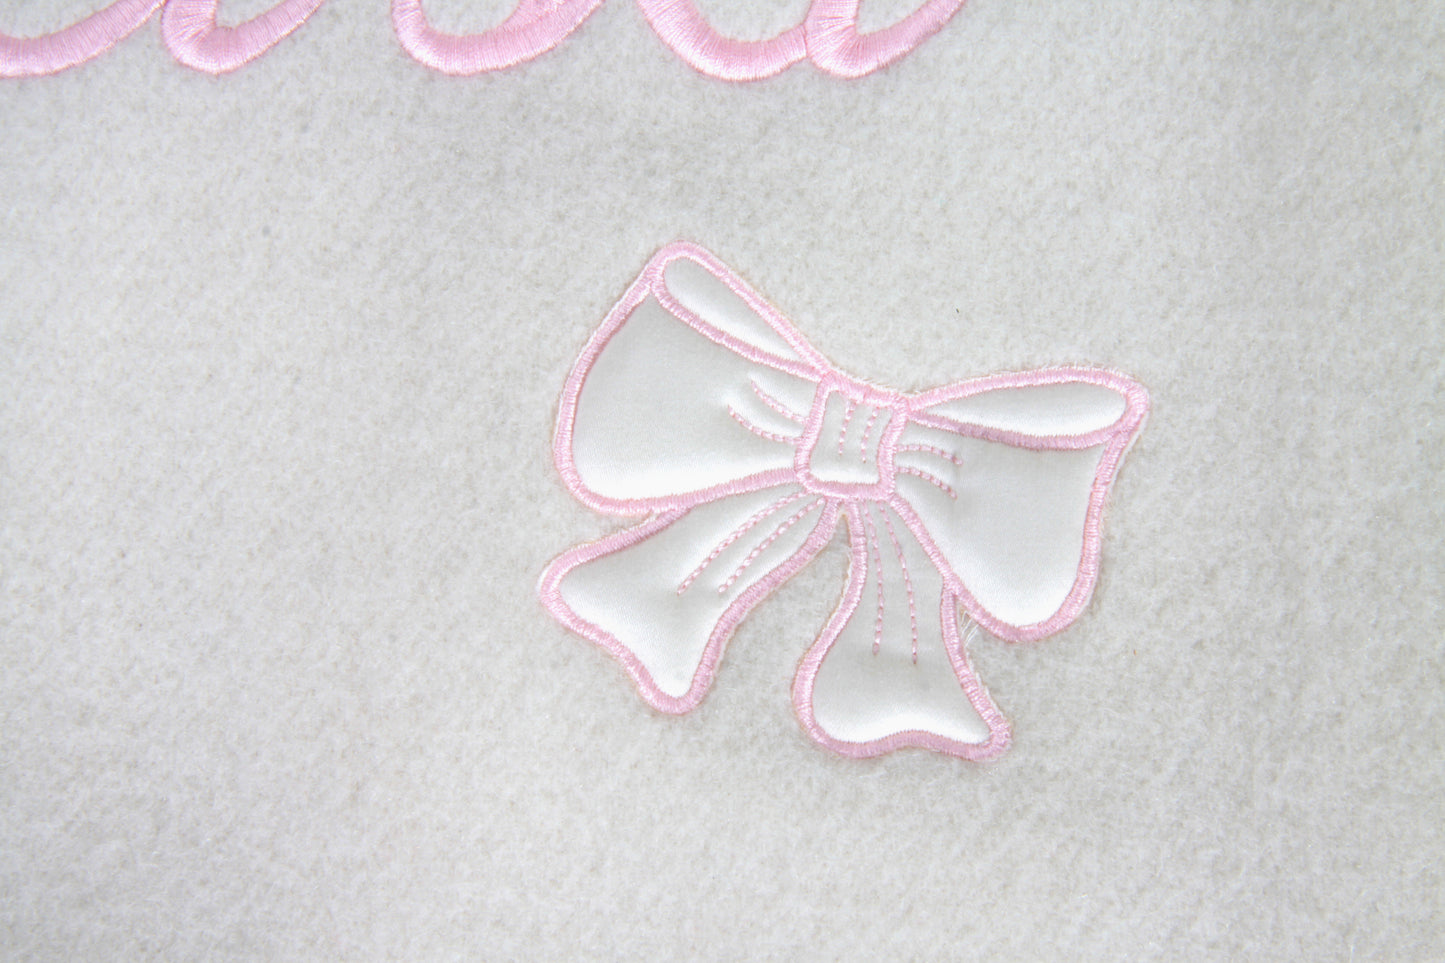 SPRING CRIB BLANKET WITH PERSONALIZED EMBROIDERY AMORE | Pure cashmere